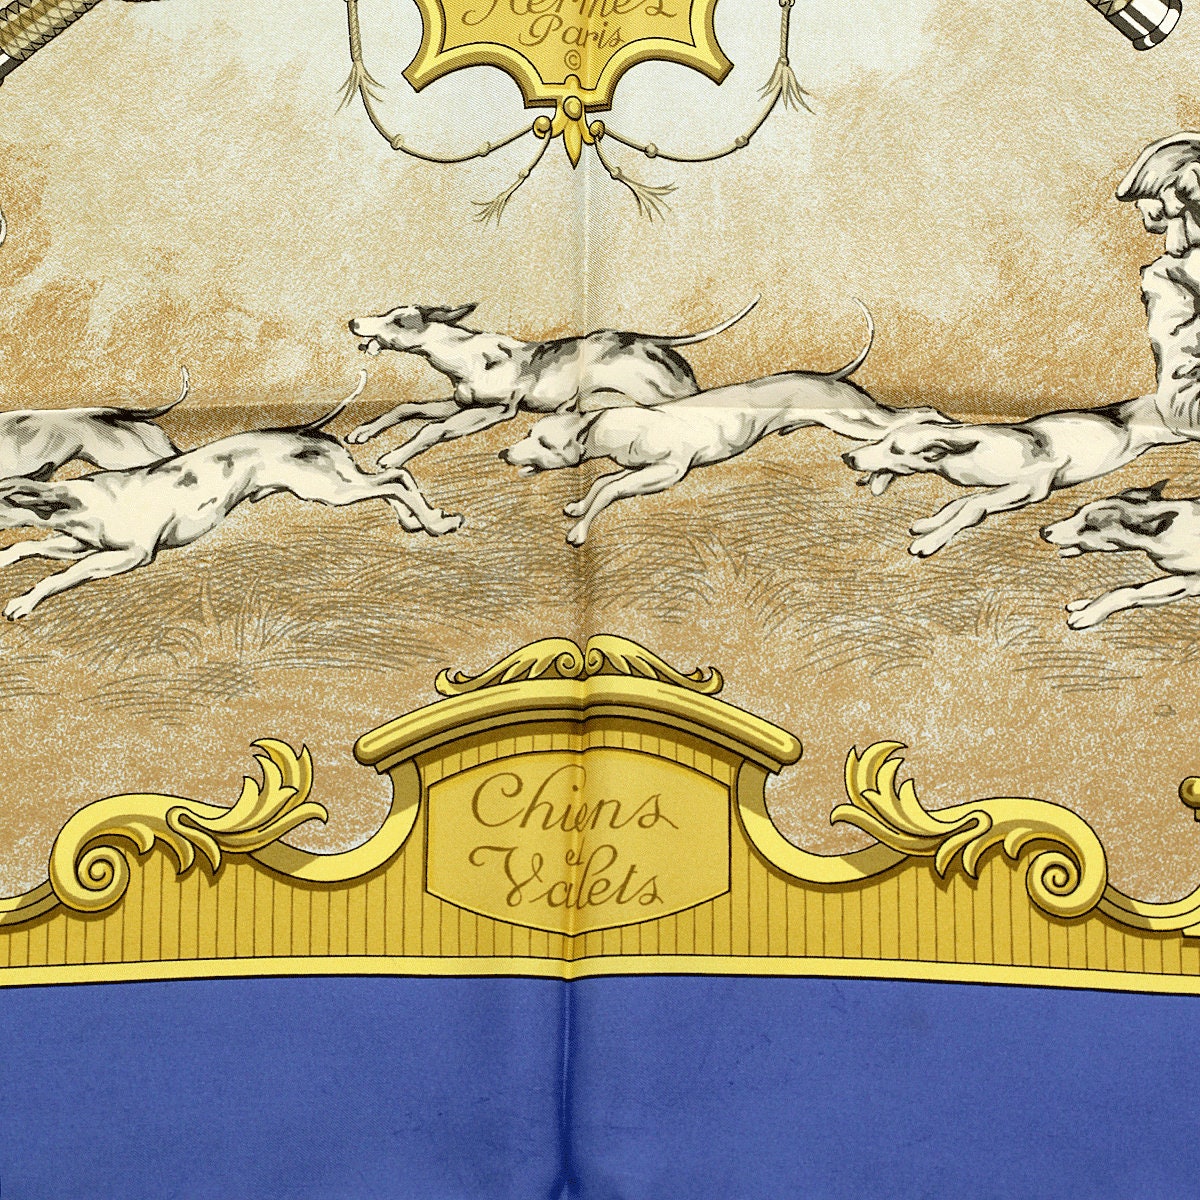 Hermes Scarf &quot;Chiens et Valets&quot; by Charles Hallo 90cm Silk | Carre Foulard